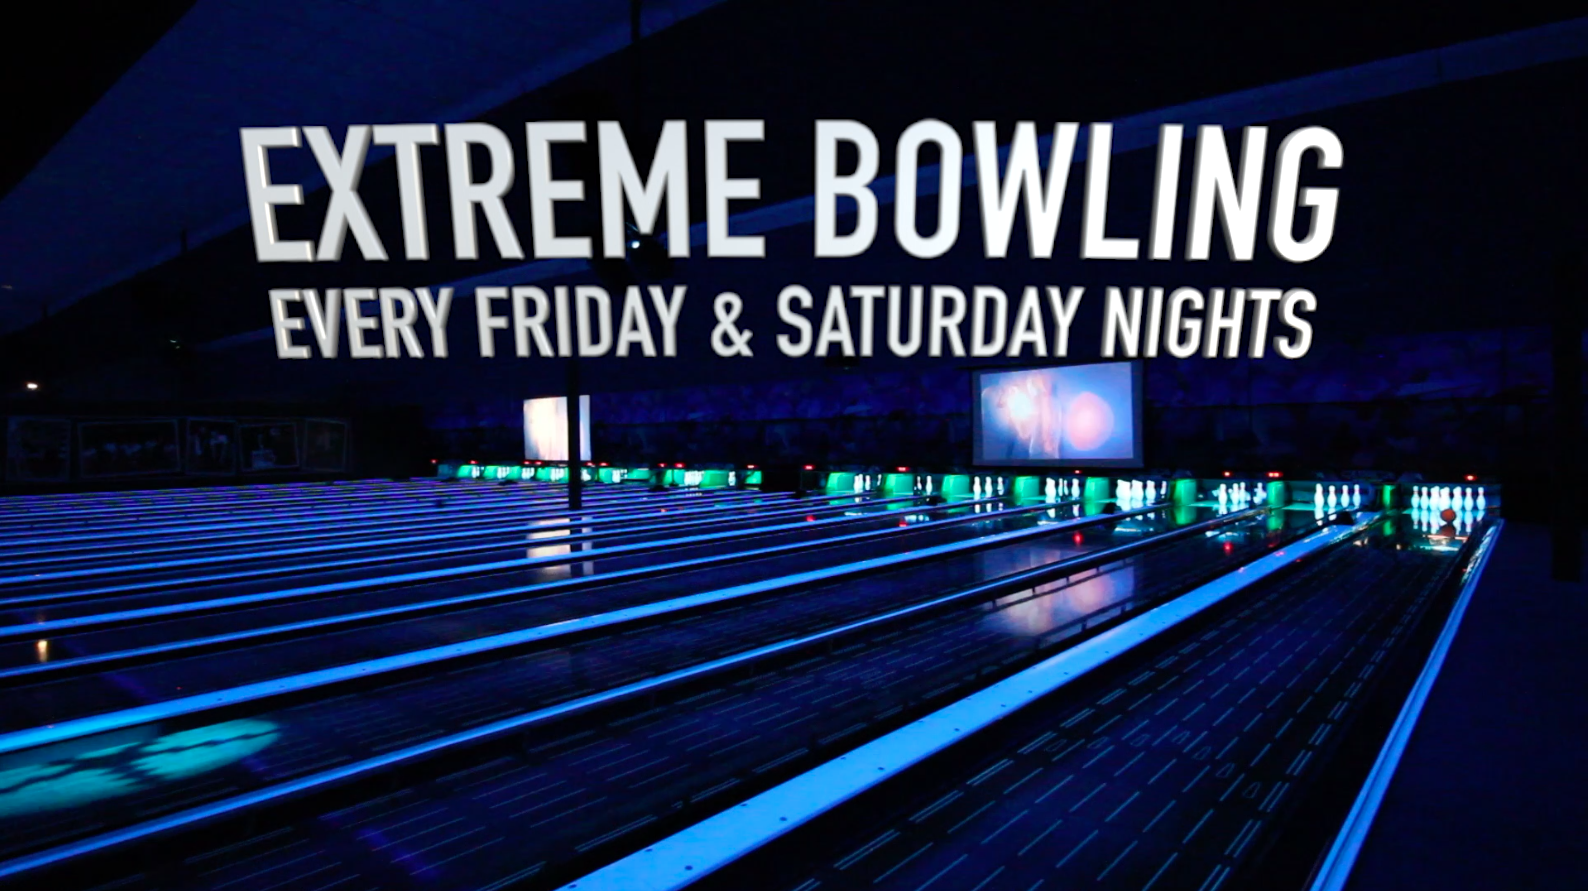 Extreme Glow Bowl, Extreme Glow Bowl Friday & Saturday 10p-1a UNLIMITED  bowling and shoes for $15 per person, By Tenn Pin Alley